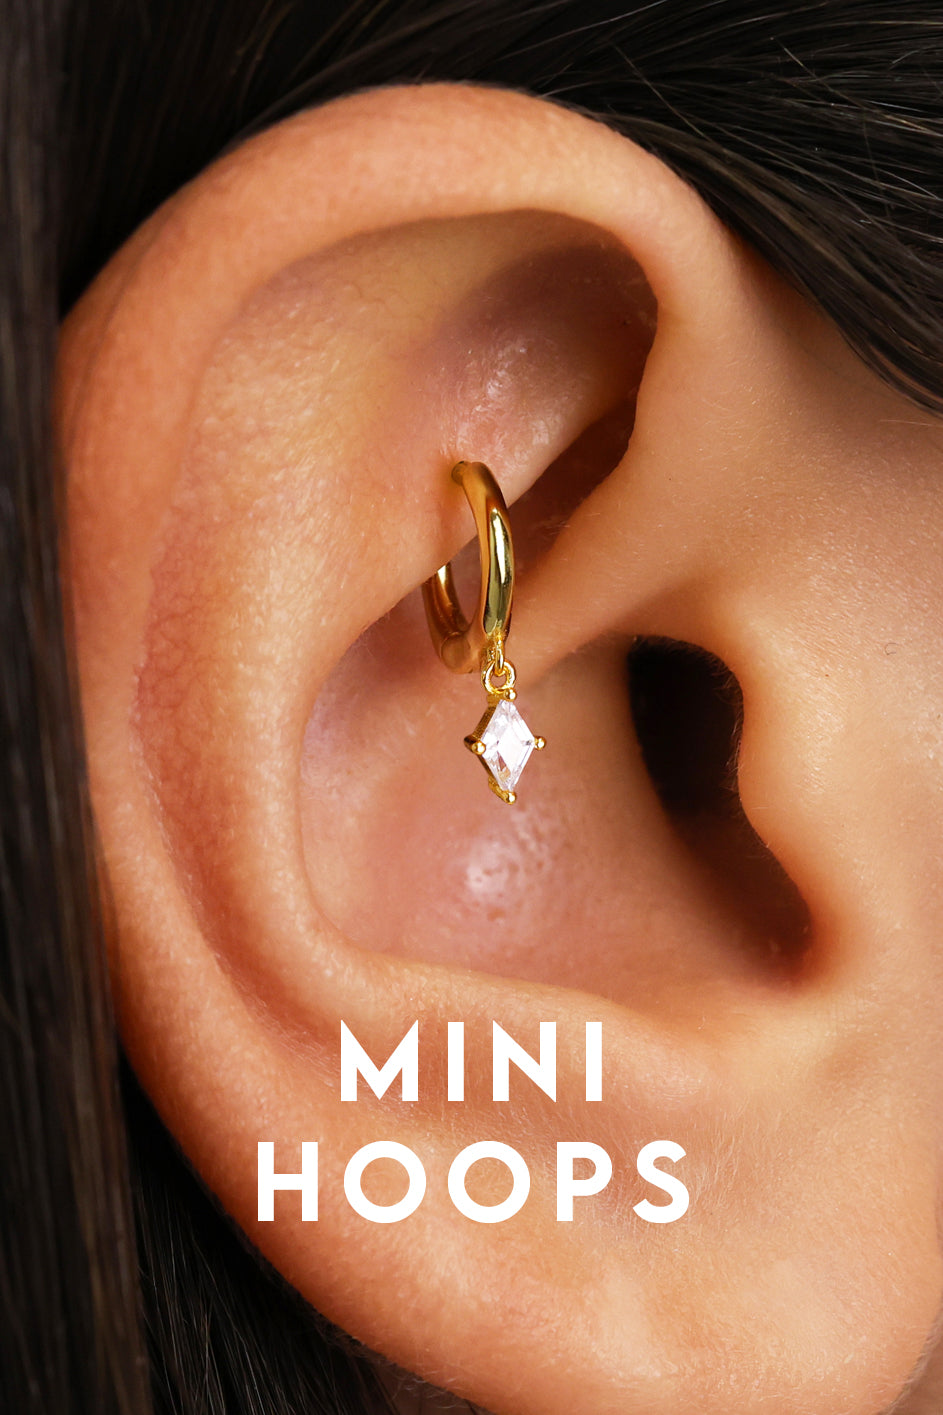 Mini hoop earrings collection tailored for cartilage earrings 